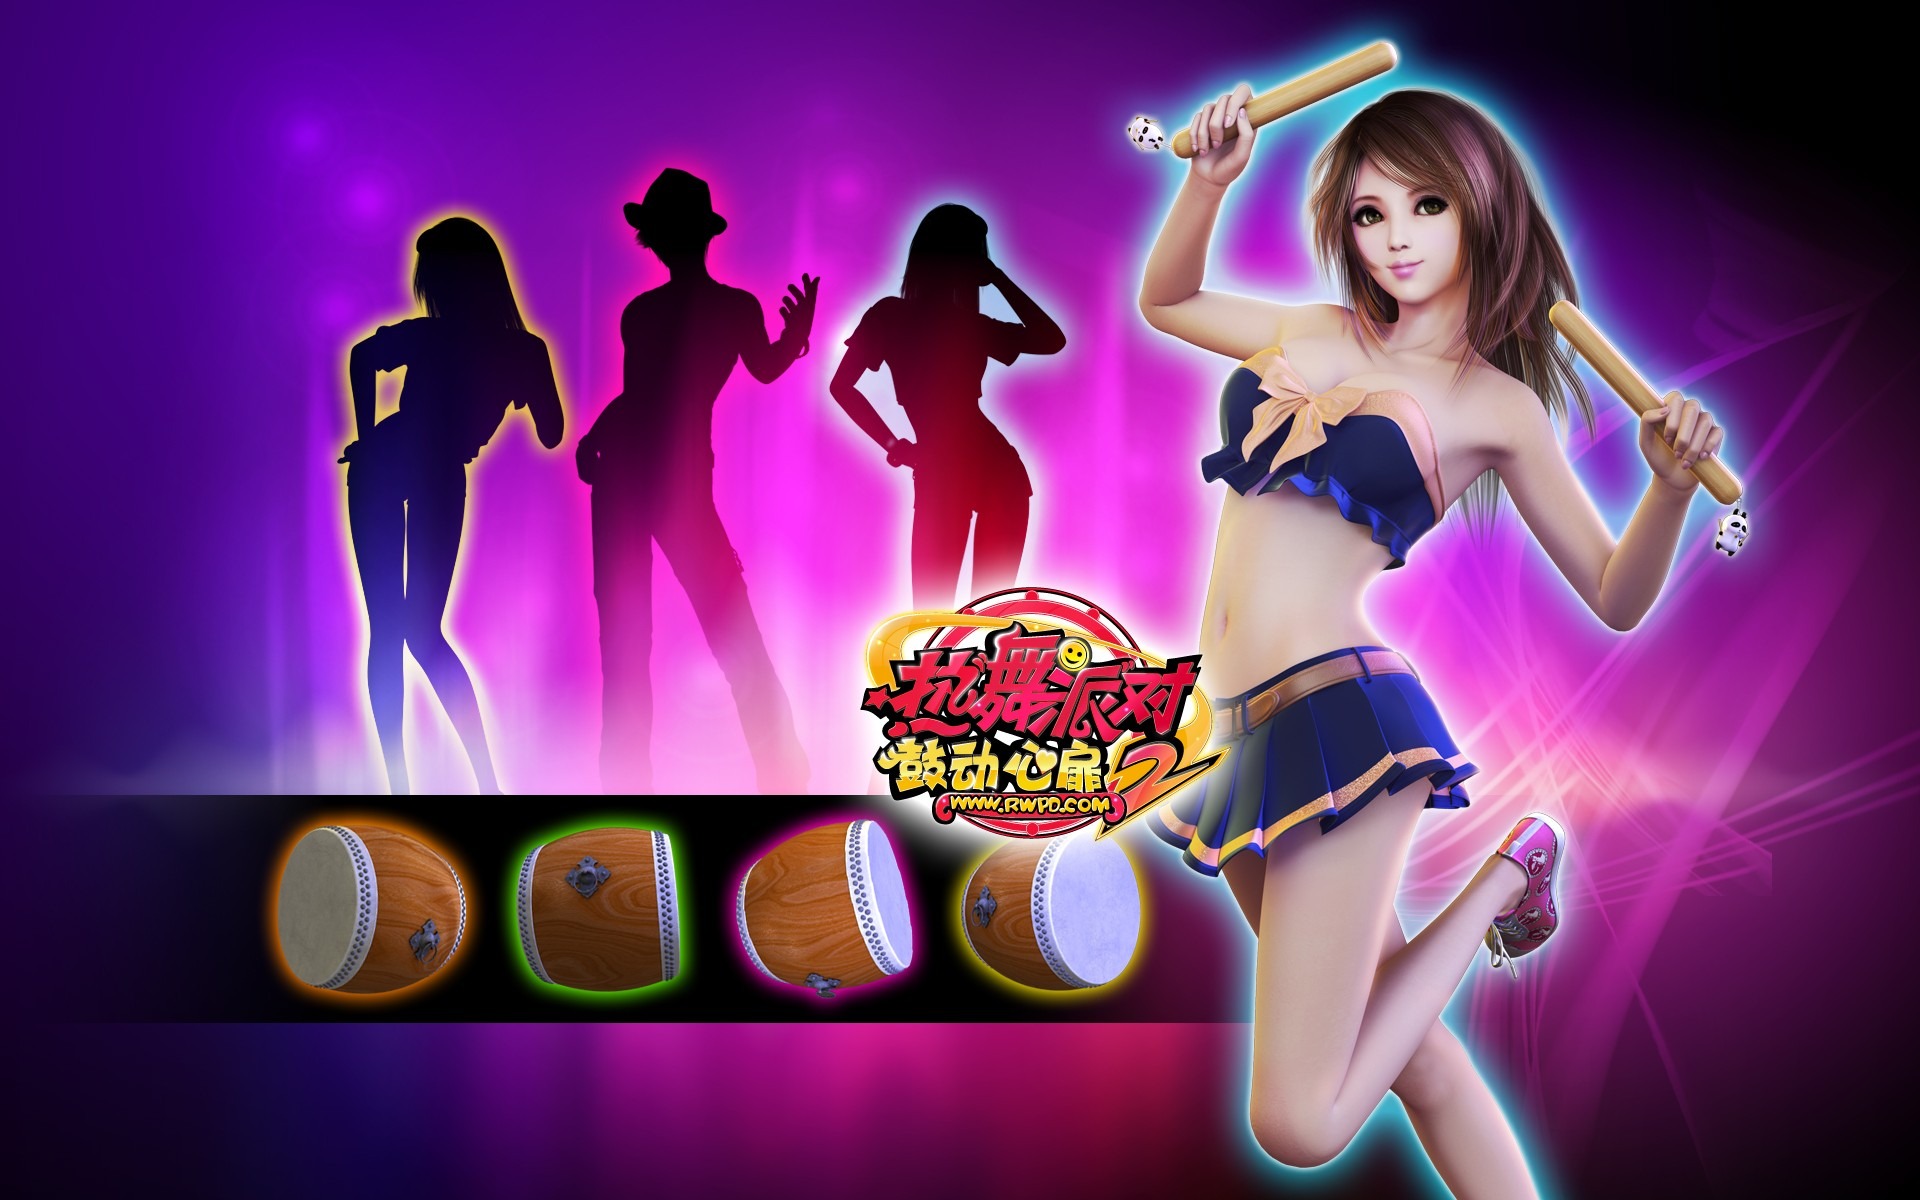 Online game Hot Dance Party II official wallpapers #15 - 1920x1200